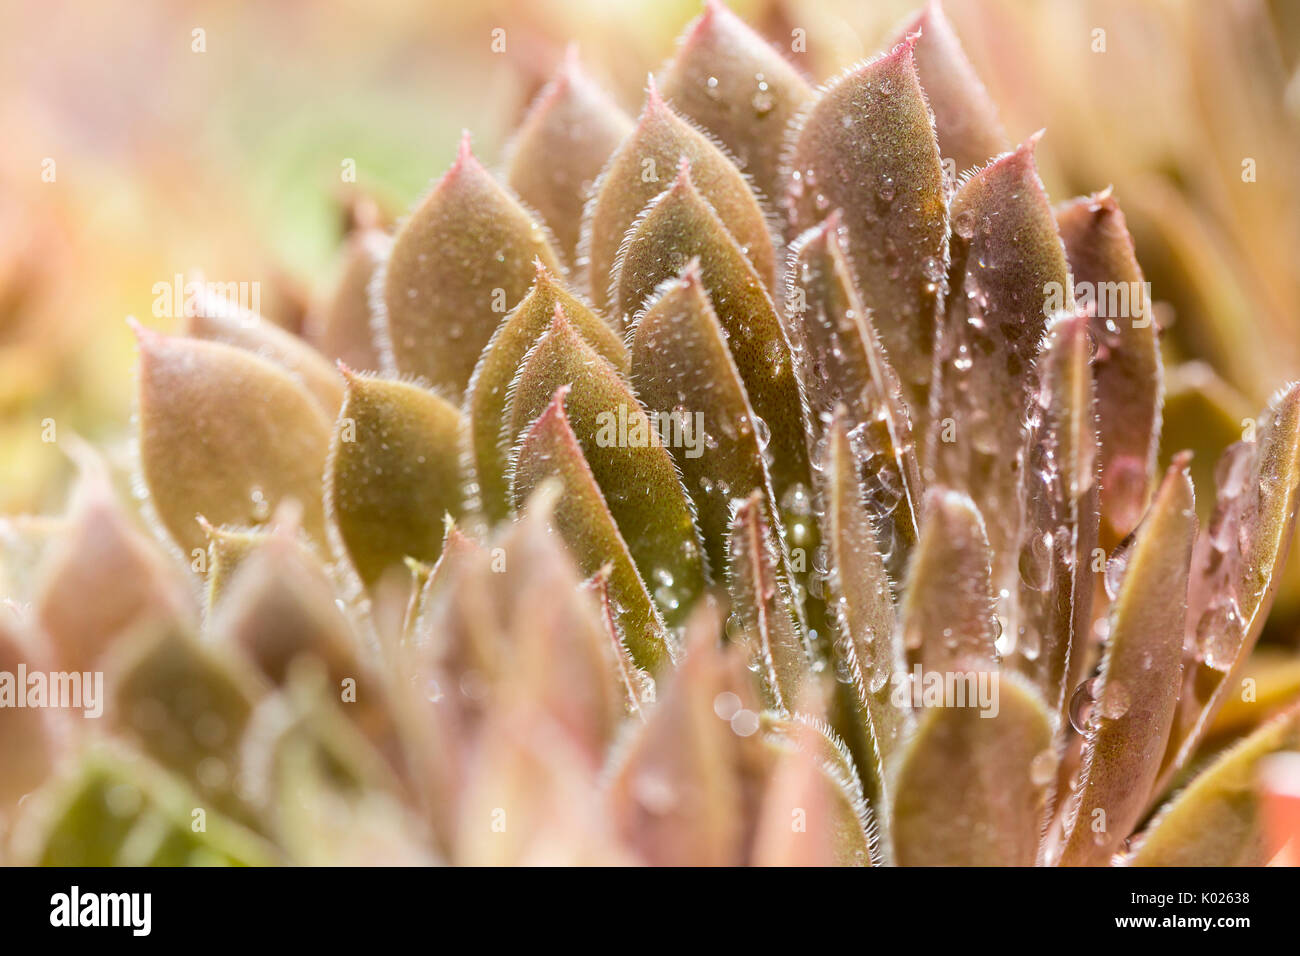 Close up details of Succulent plant covered in water drops Stock Photo